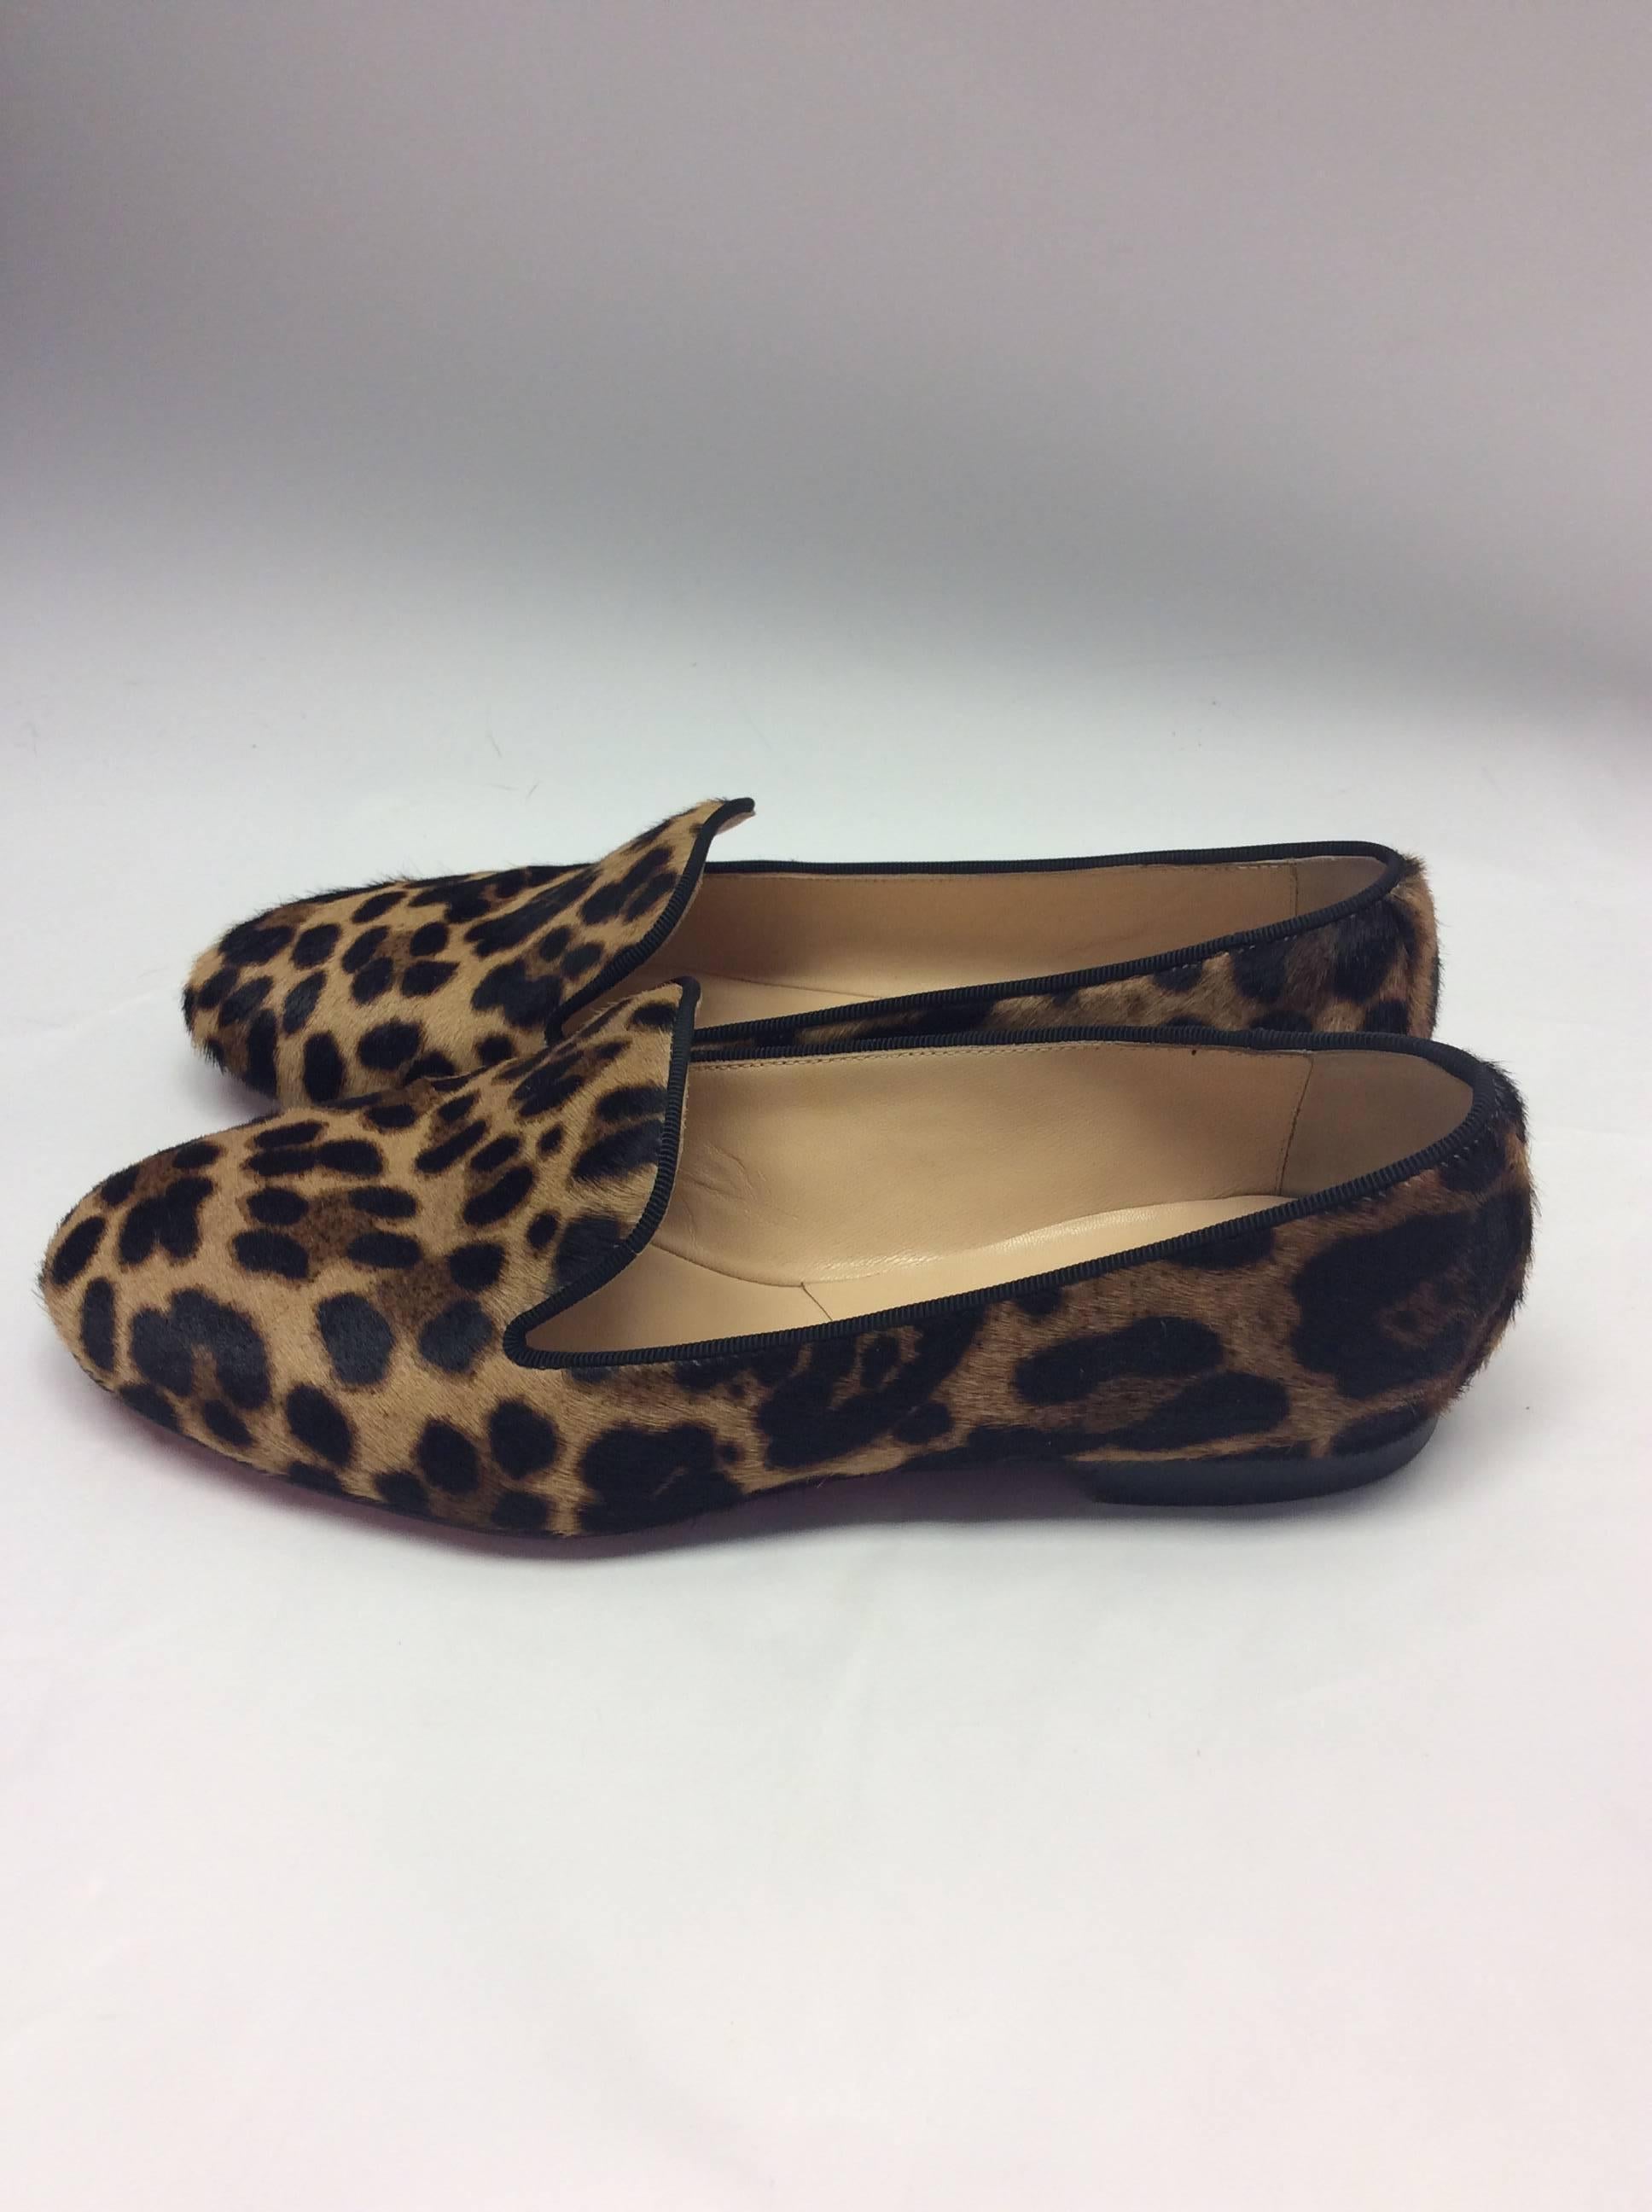 Black Christian Louboutin Leopard Loafers For Sale